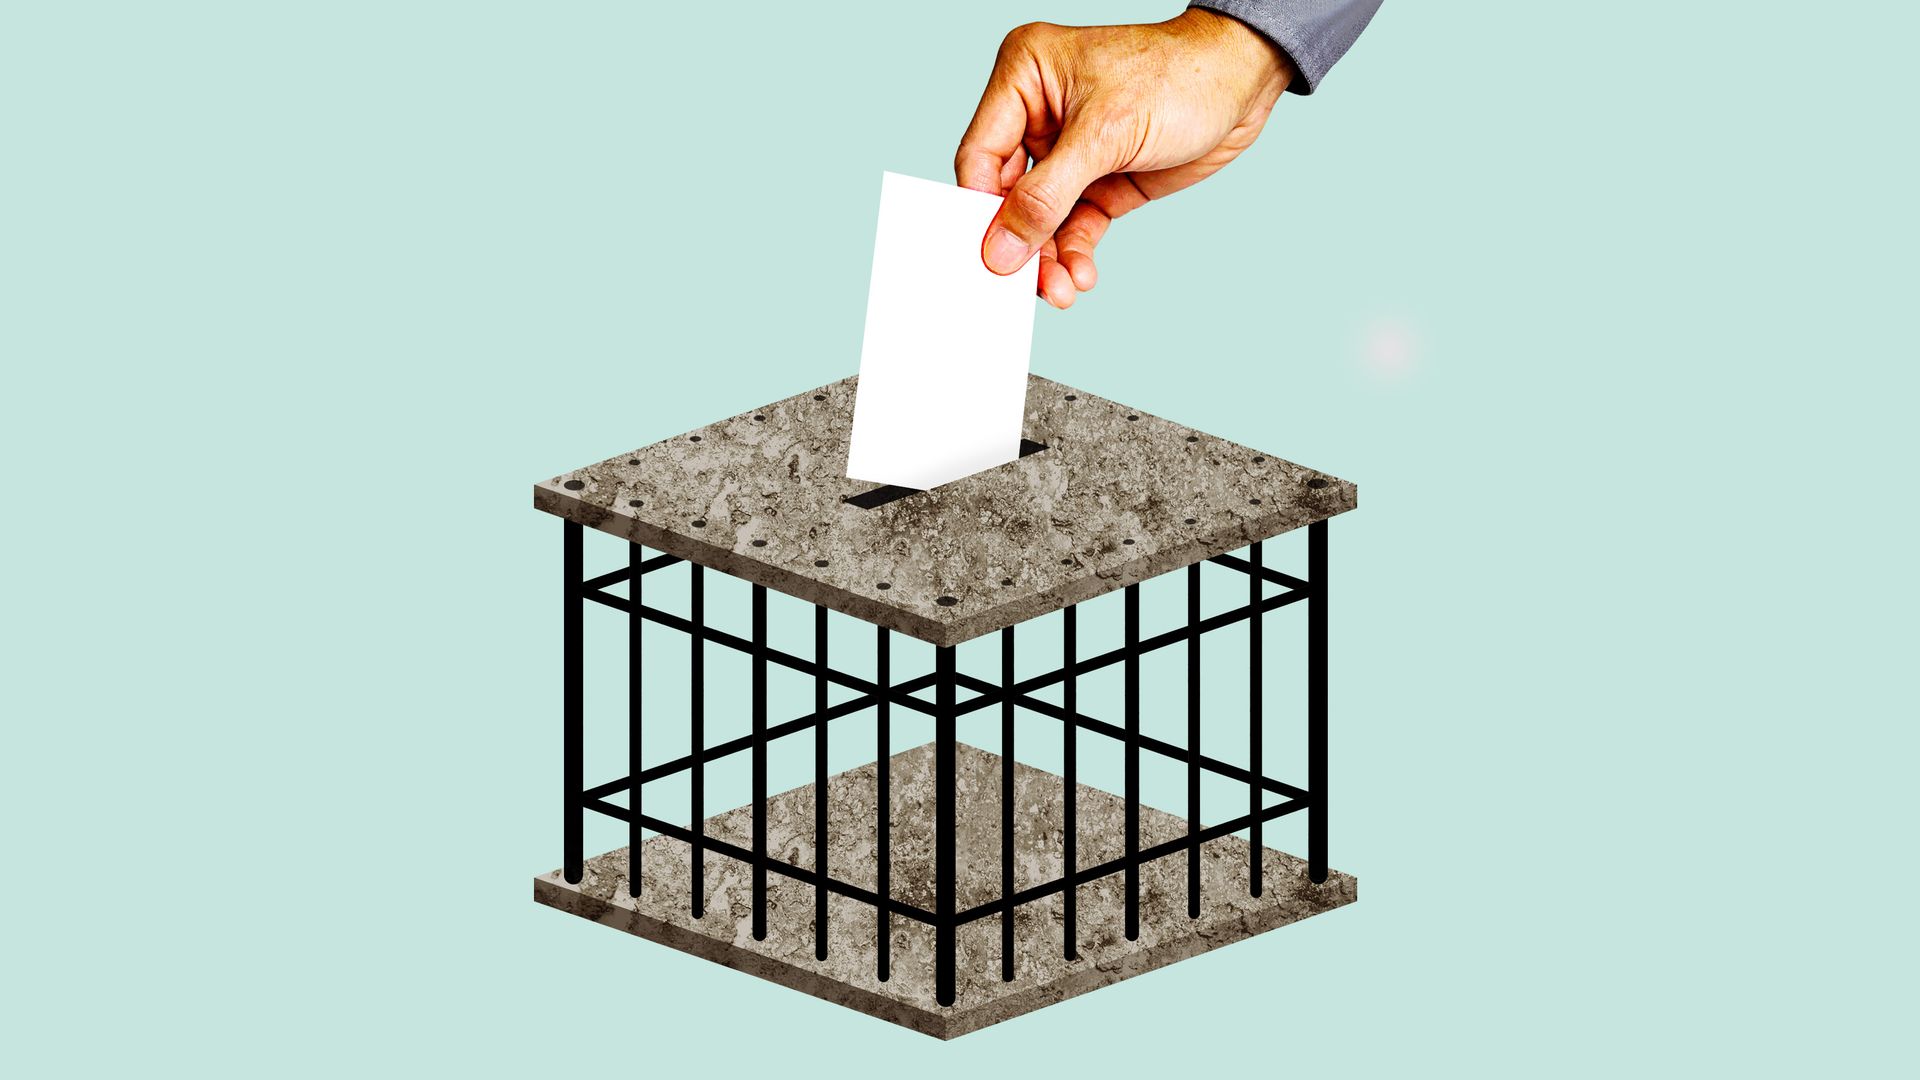 A ballot being cast in a ballot box shaped like a jail cell